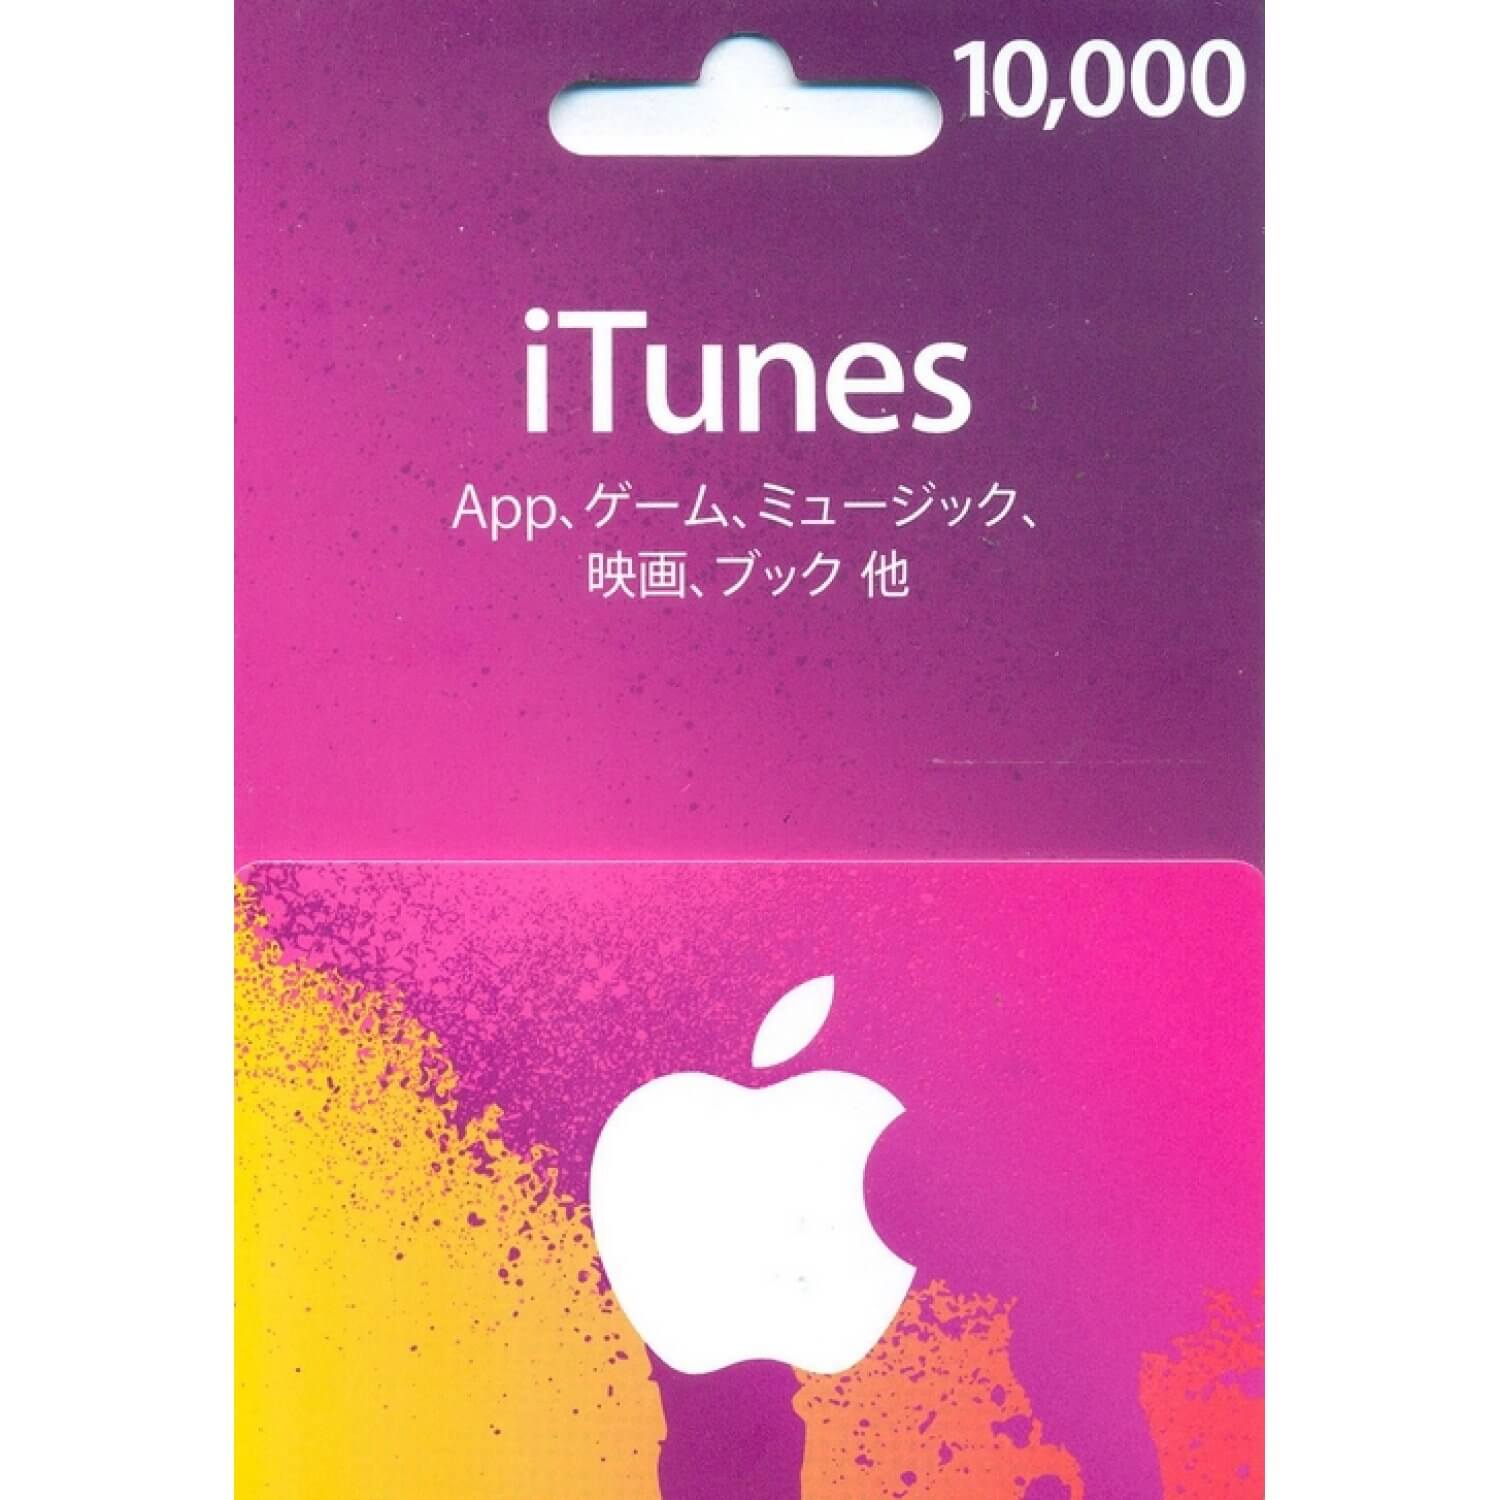 iTunes Japan Gift Card 10000 JPY - Japan iTunes Card - JP Gift Cards